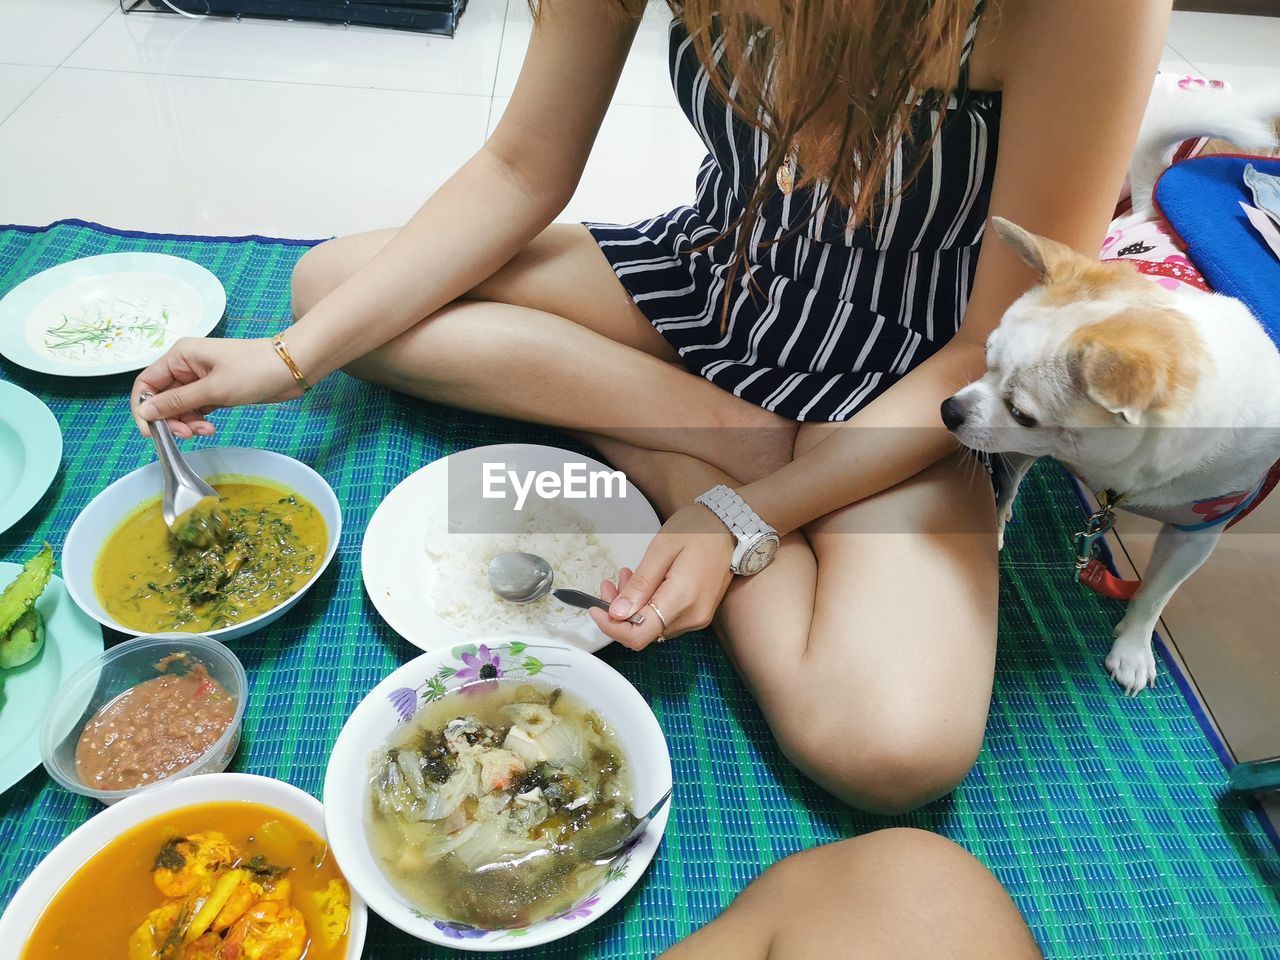 MIDSECTION OF WOMAN SITTING BY FOOD